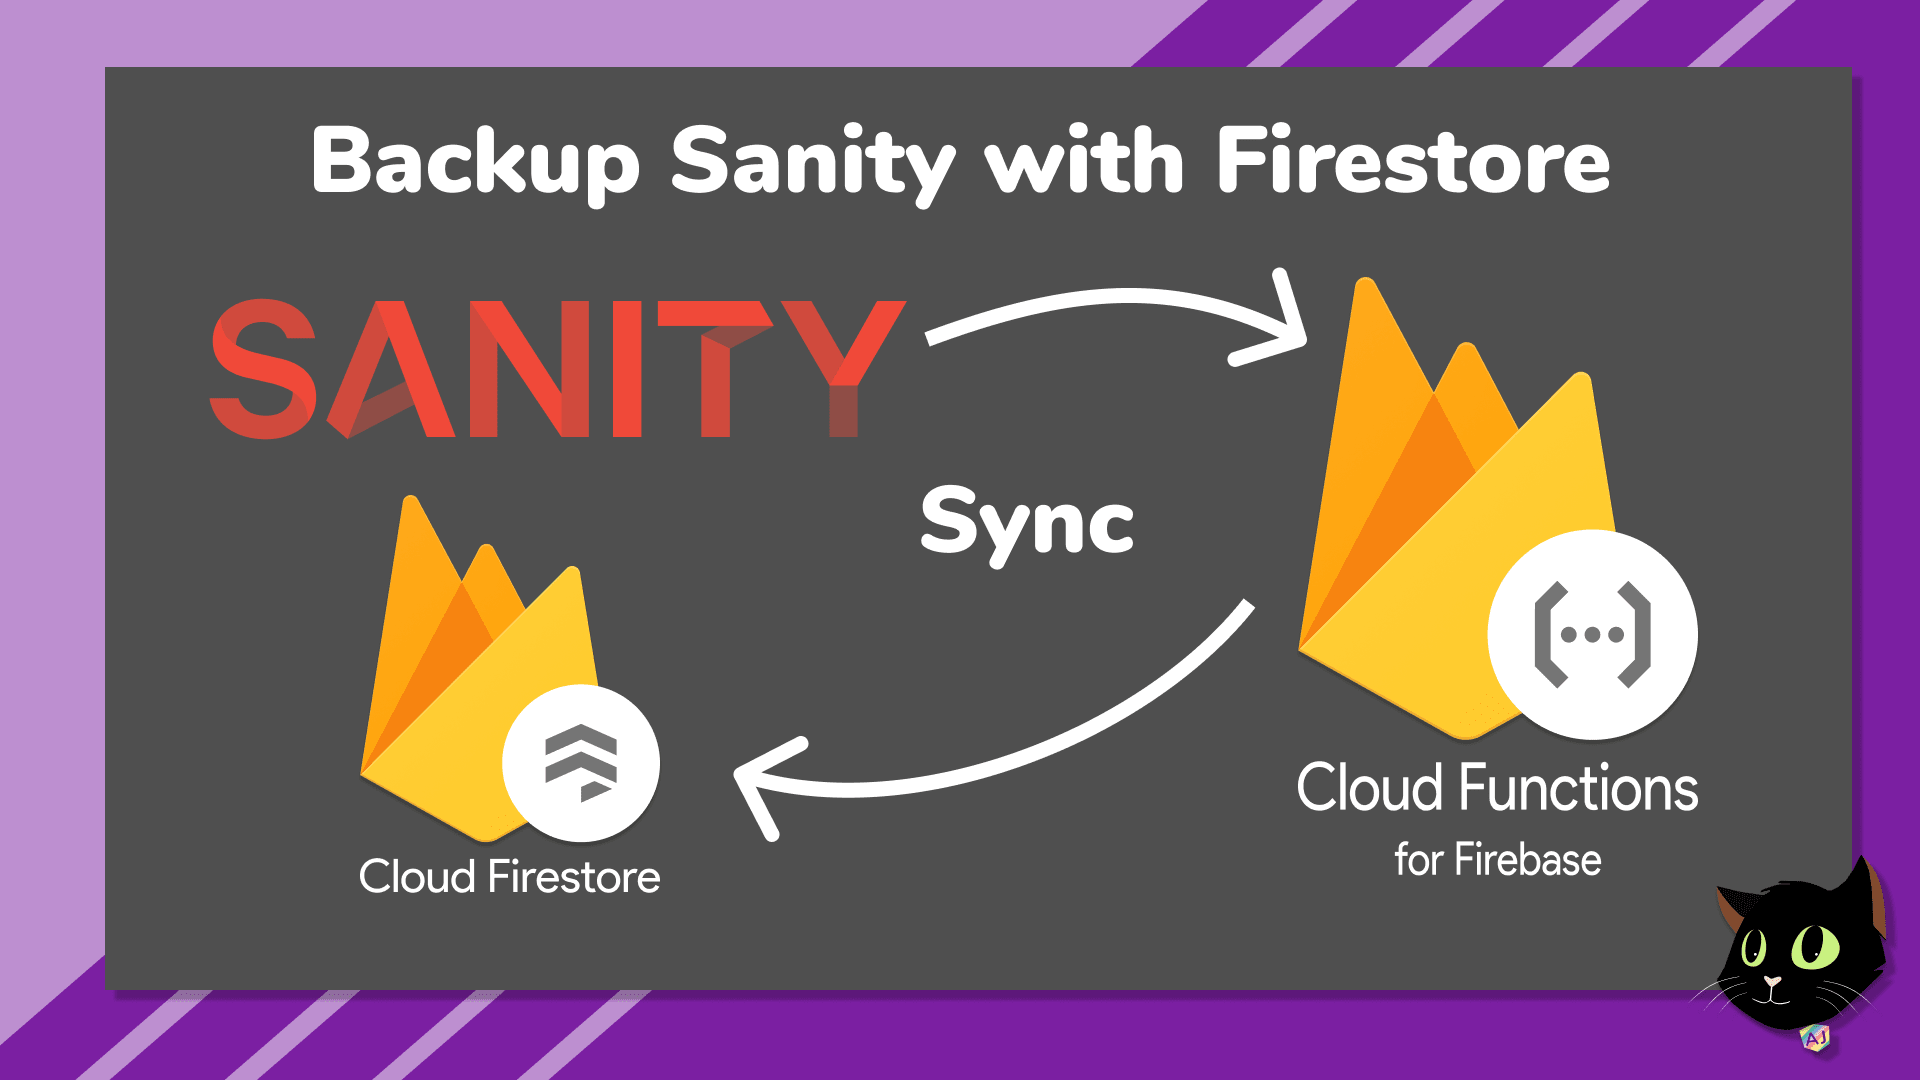 Backup Sanity with Cloud Firestore